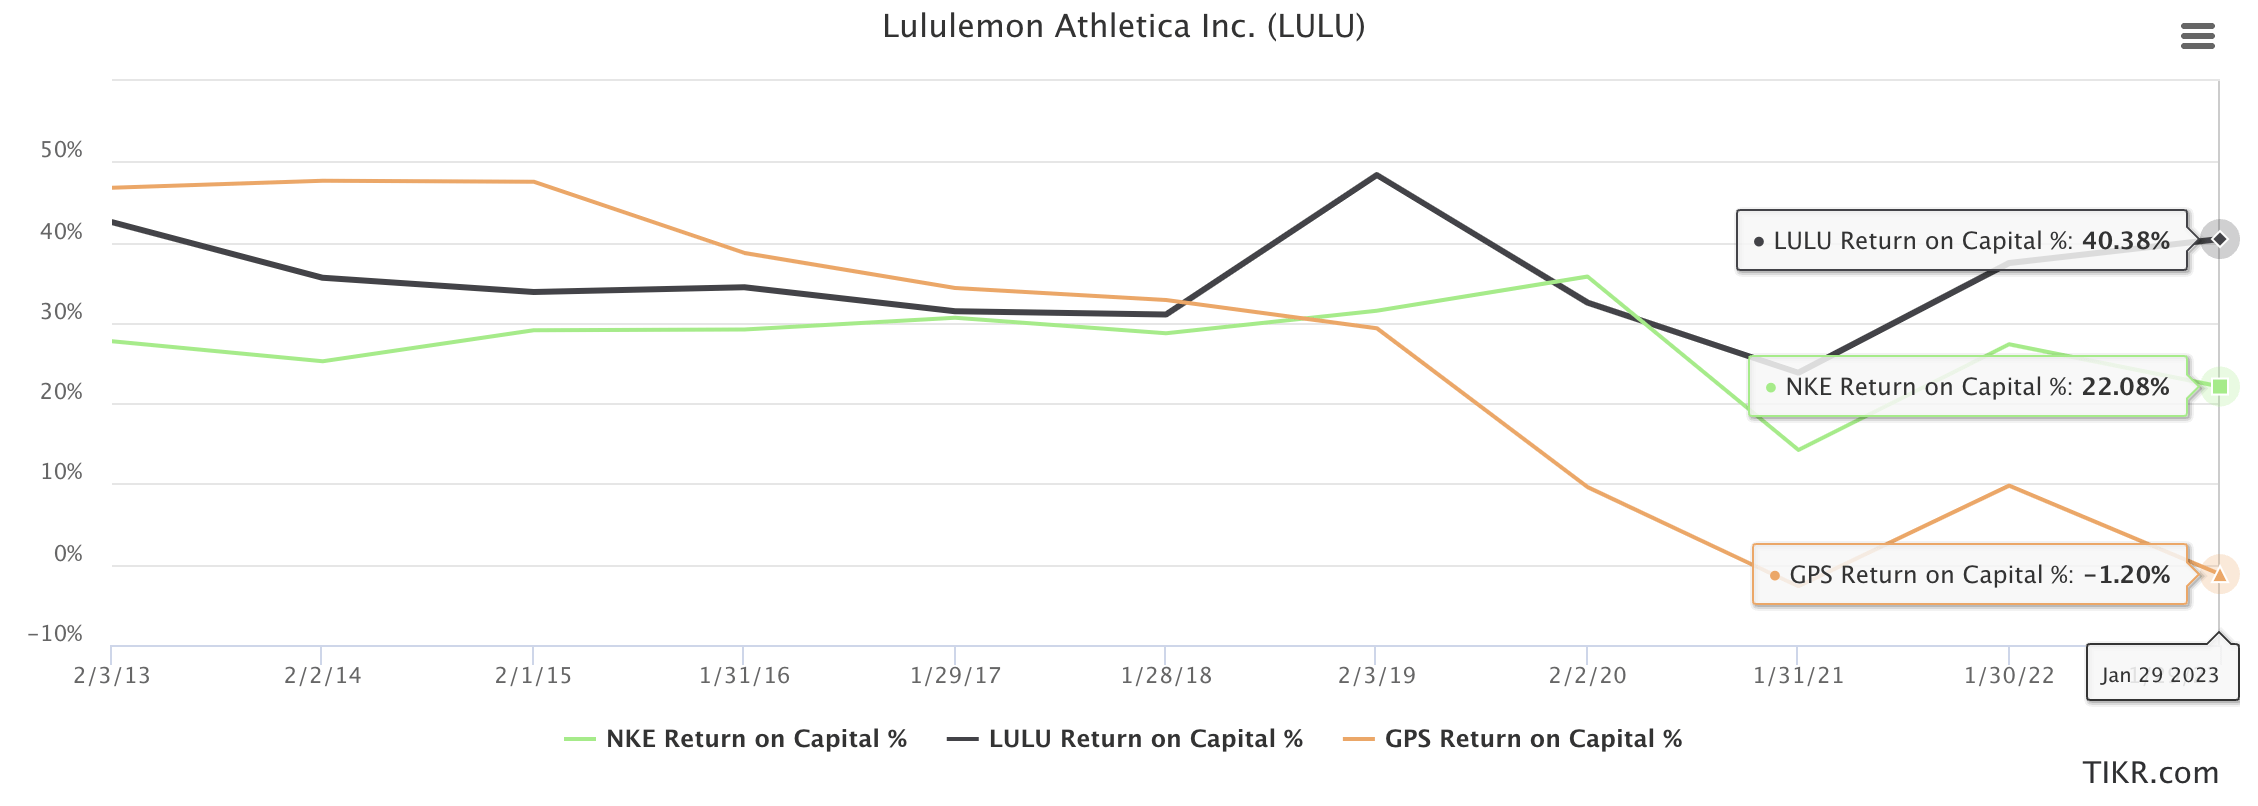 Lululemon Athletica's Q4 Earnings to Grow Nearly 9%, Revenue About 19%